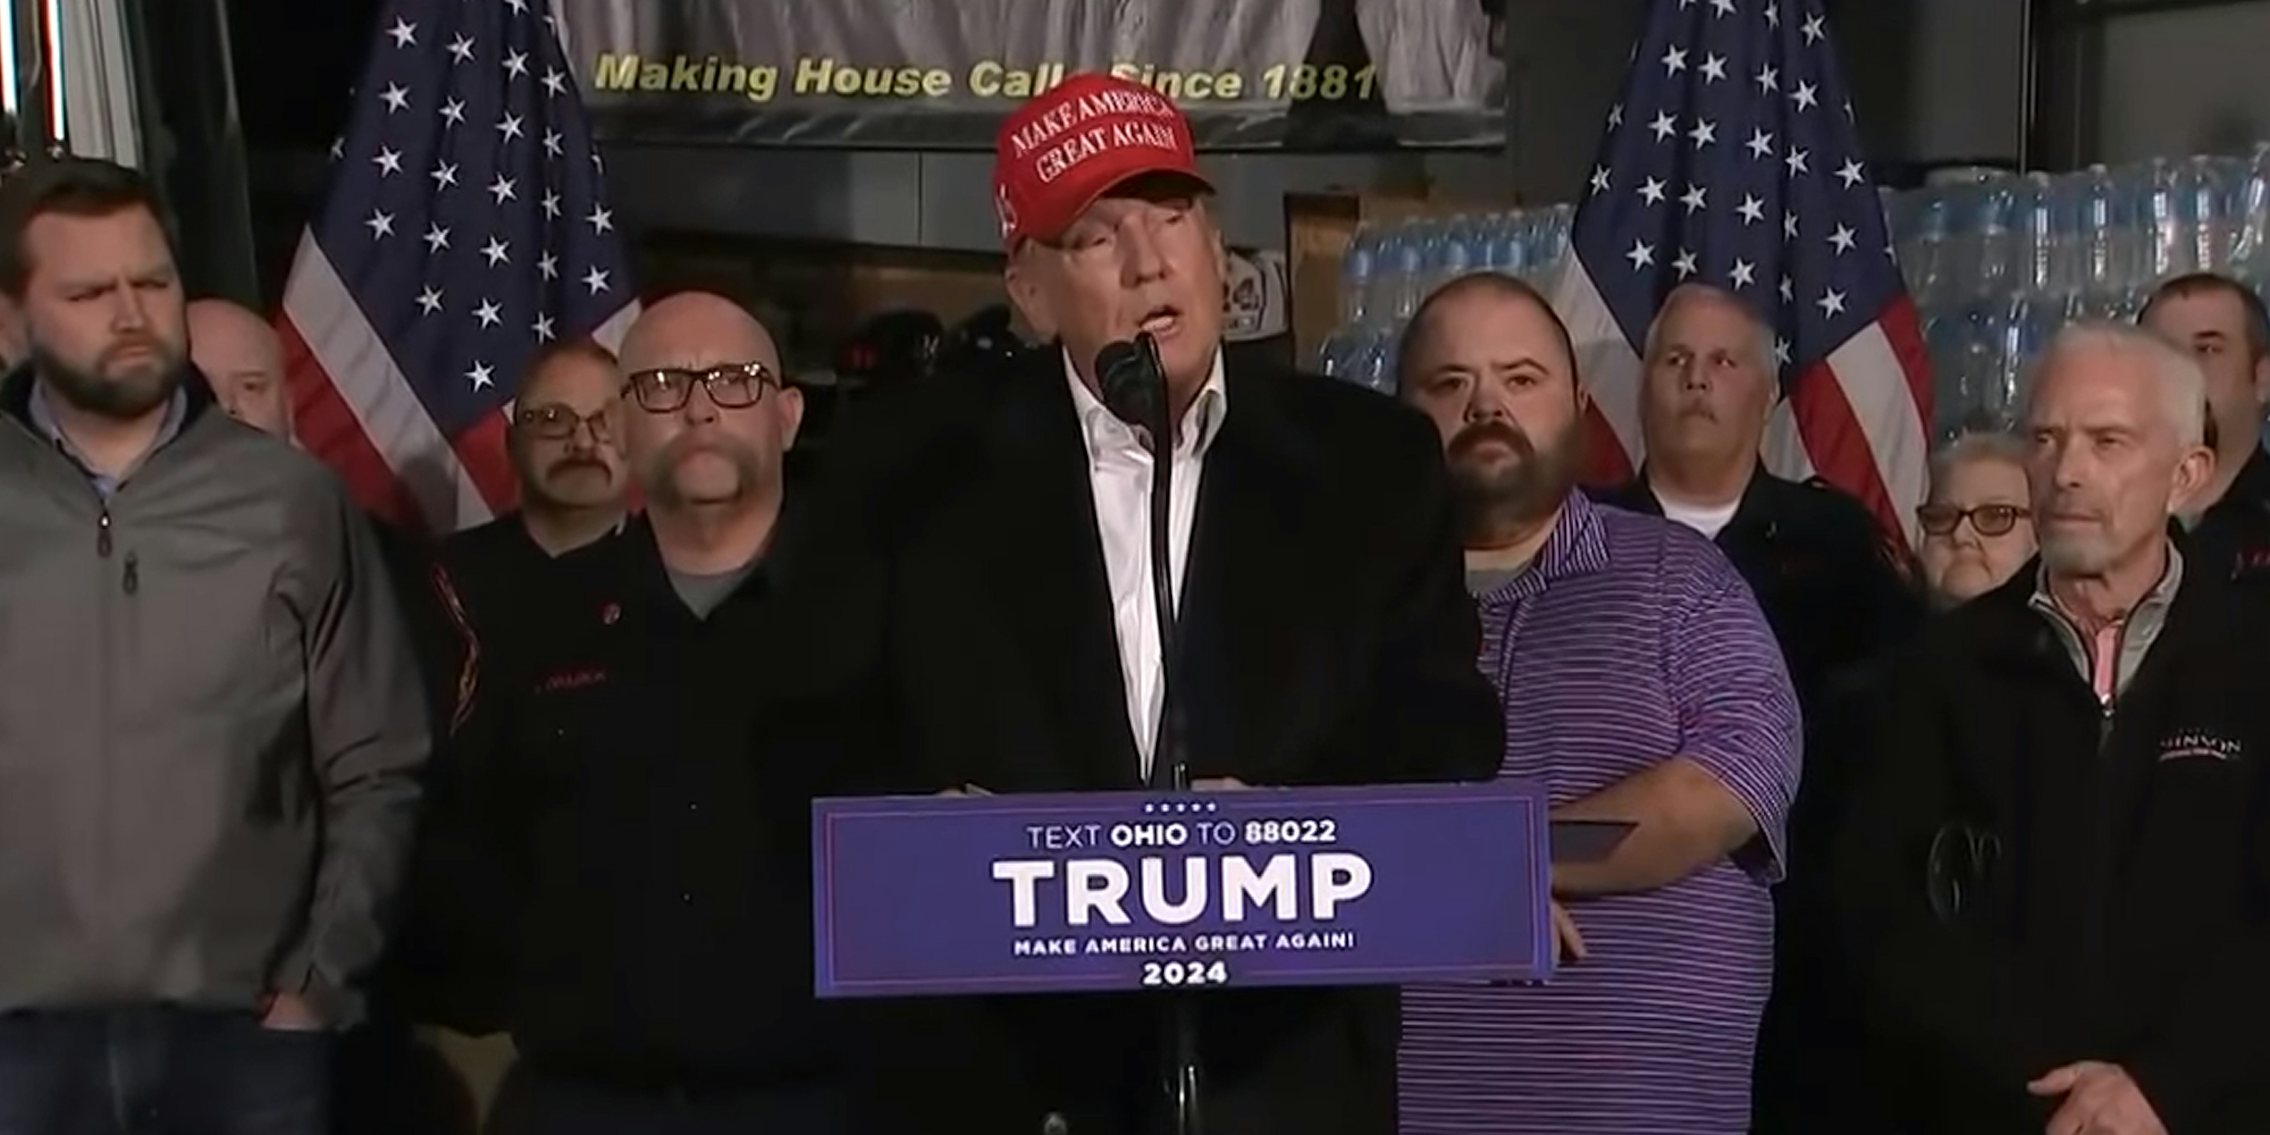 Donald Trump speaking into microphone in front of group of people in front of bottled water